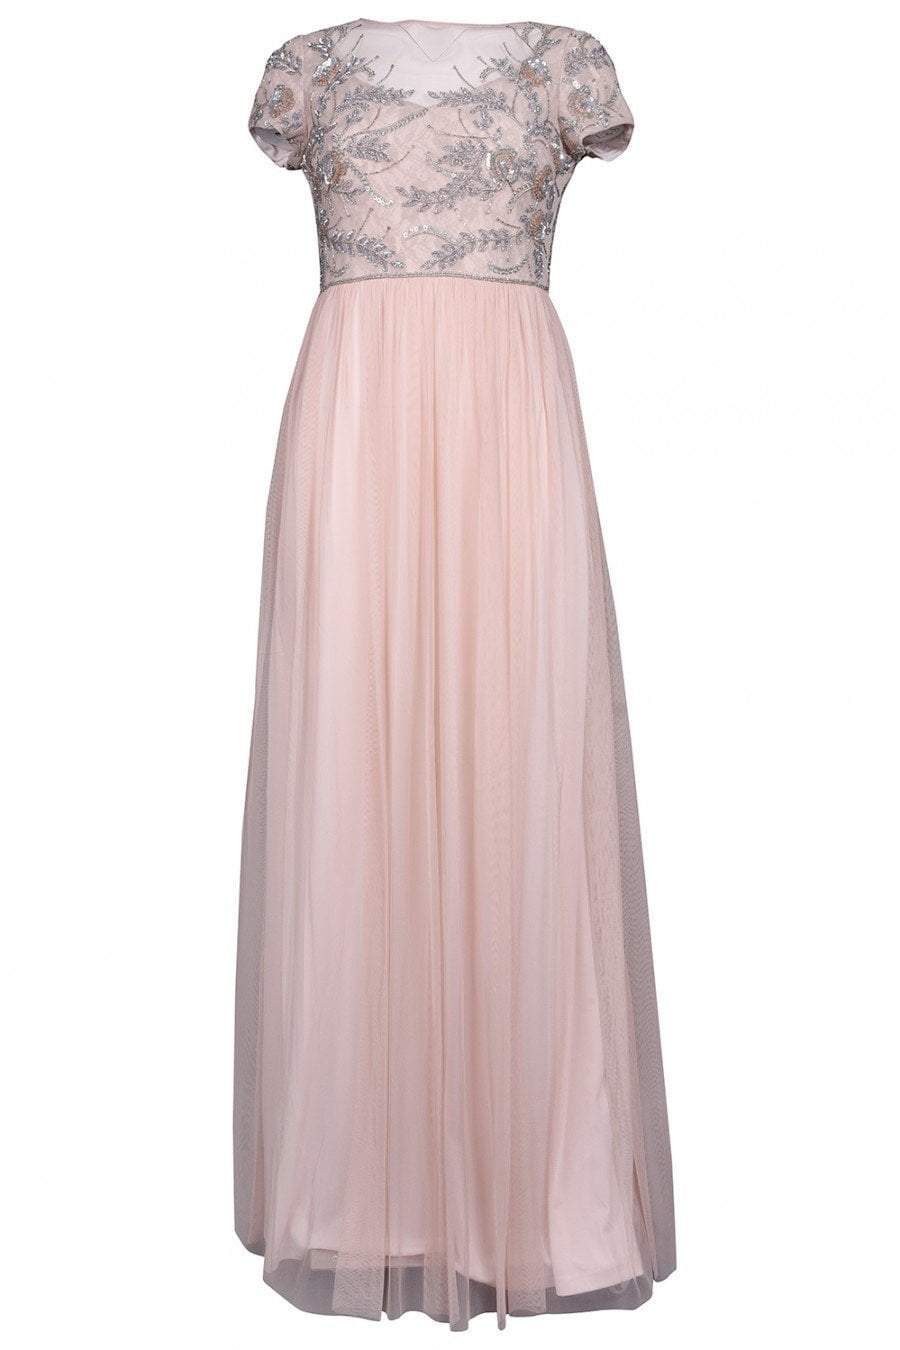 Adrianna Papell - AP1E202874 Embellished Illusion Tulle A-line Dress In Pink